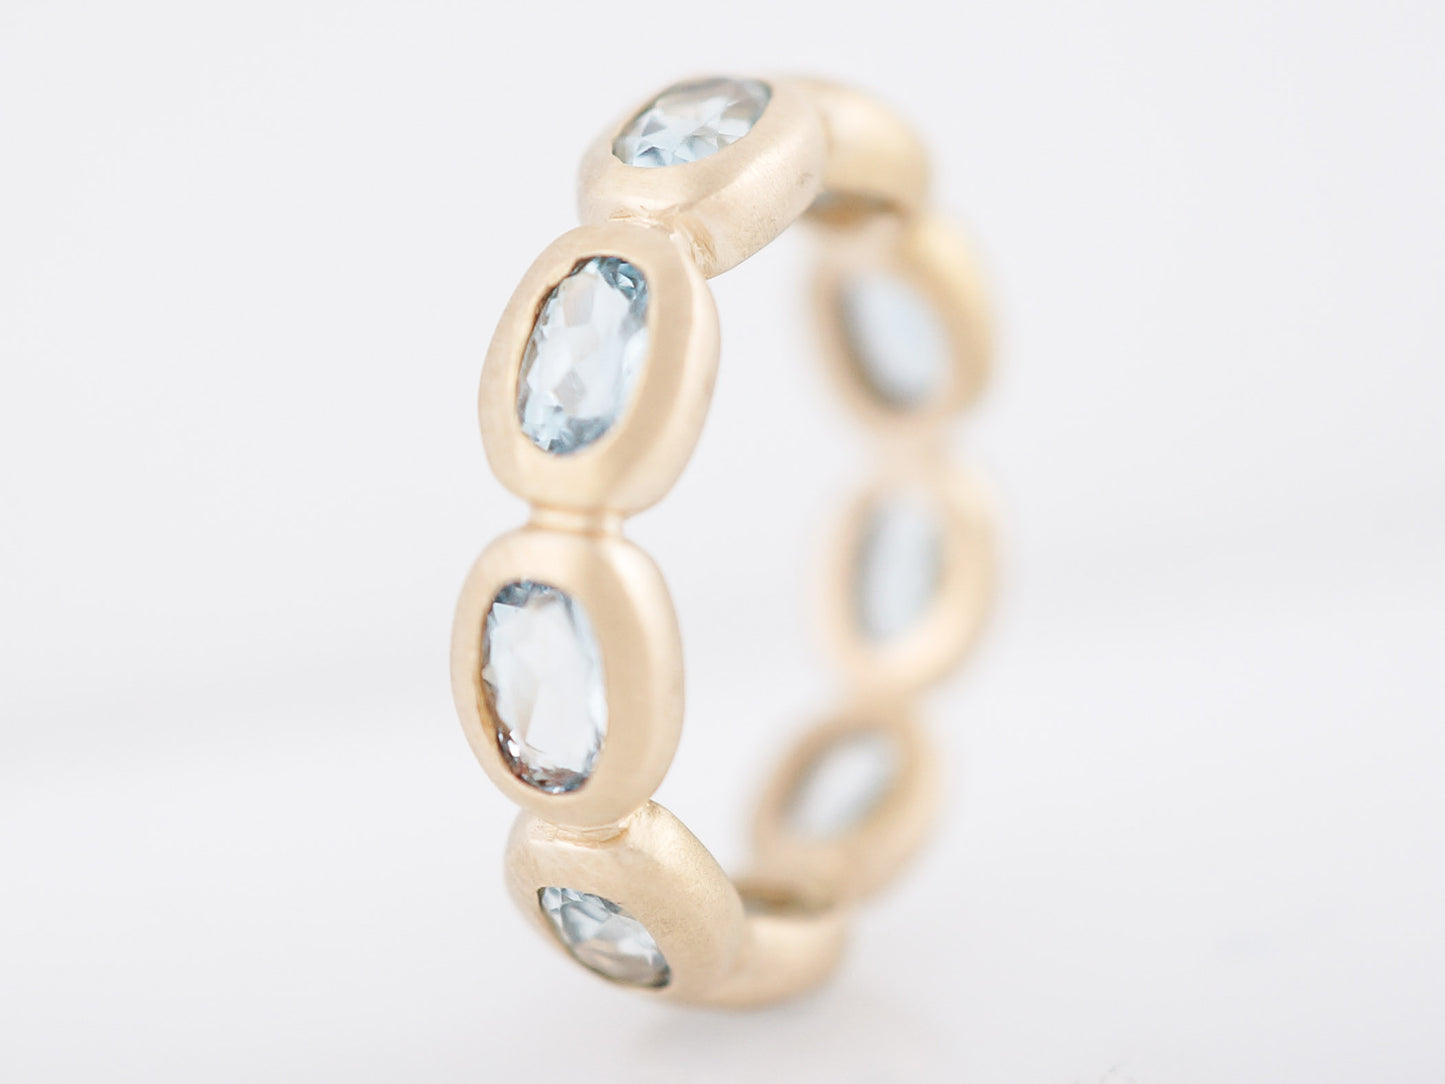 Modern Right Hand Ring 2.25 Oval Cut Aquamarine in 14K Yellow Gold